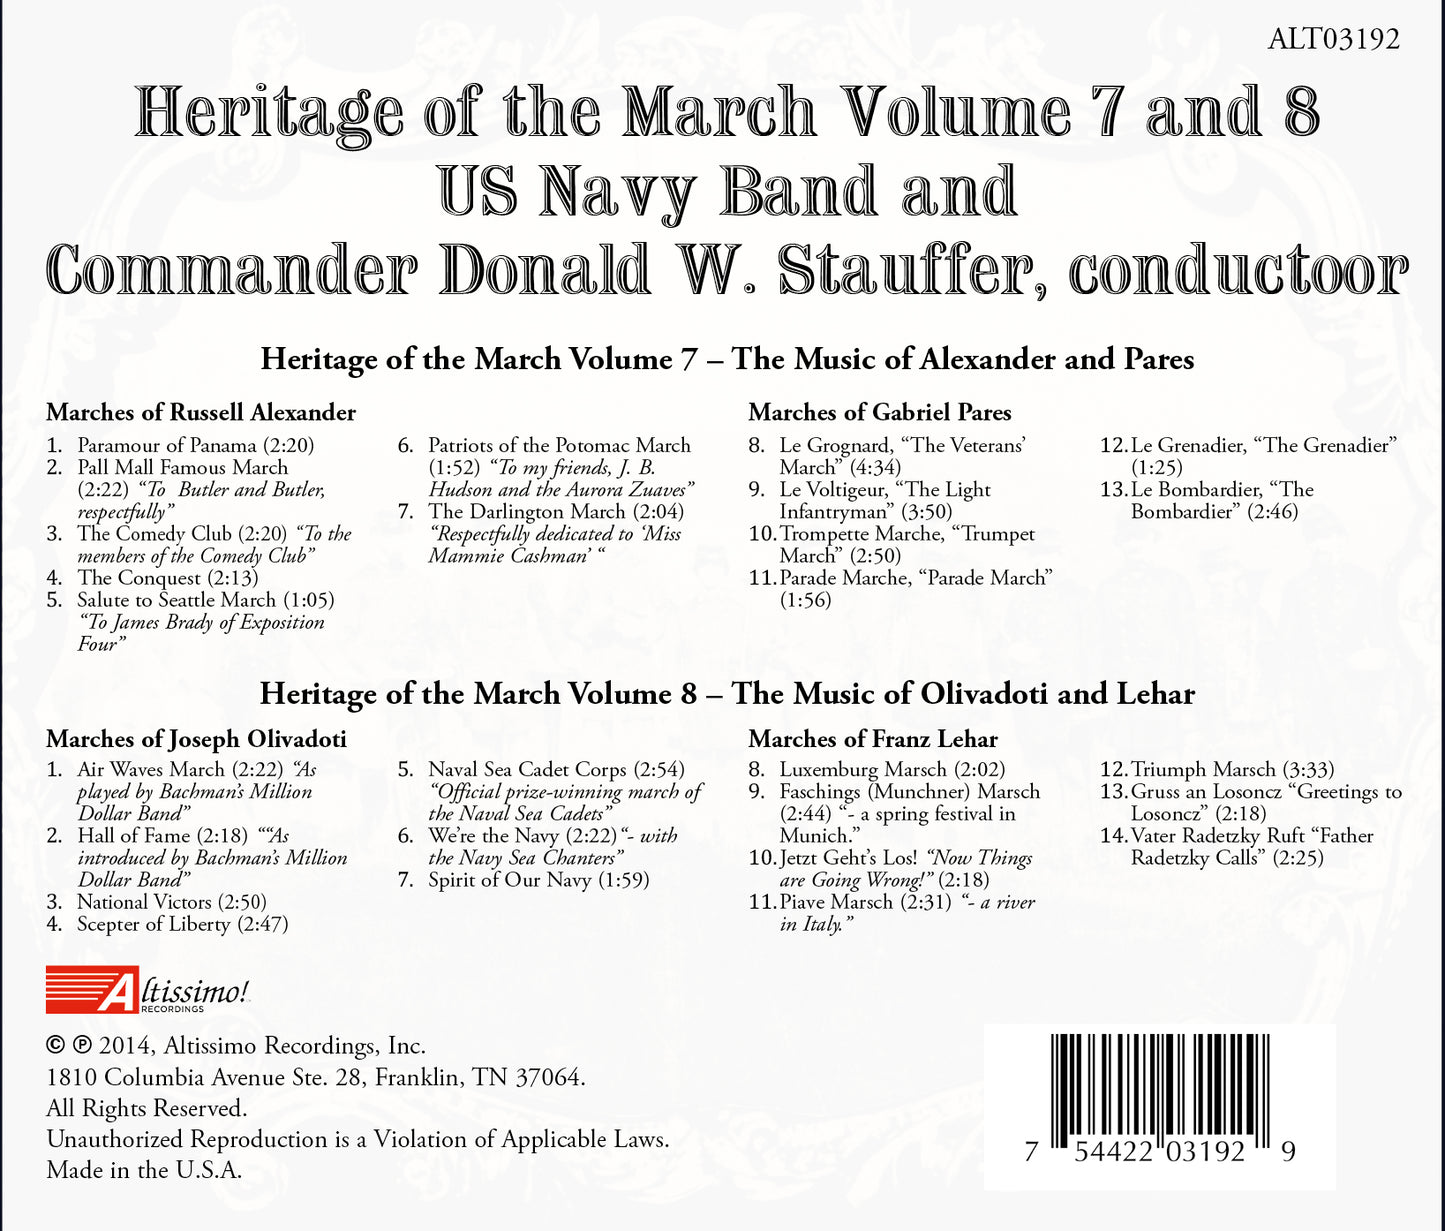 Heritage of the March, Vols. 7 & 8 [2 CDs]